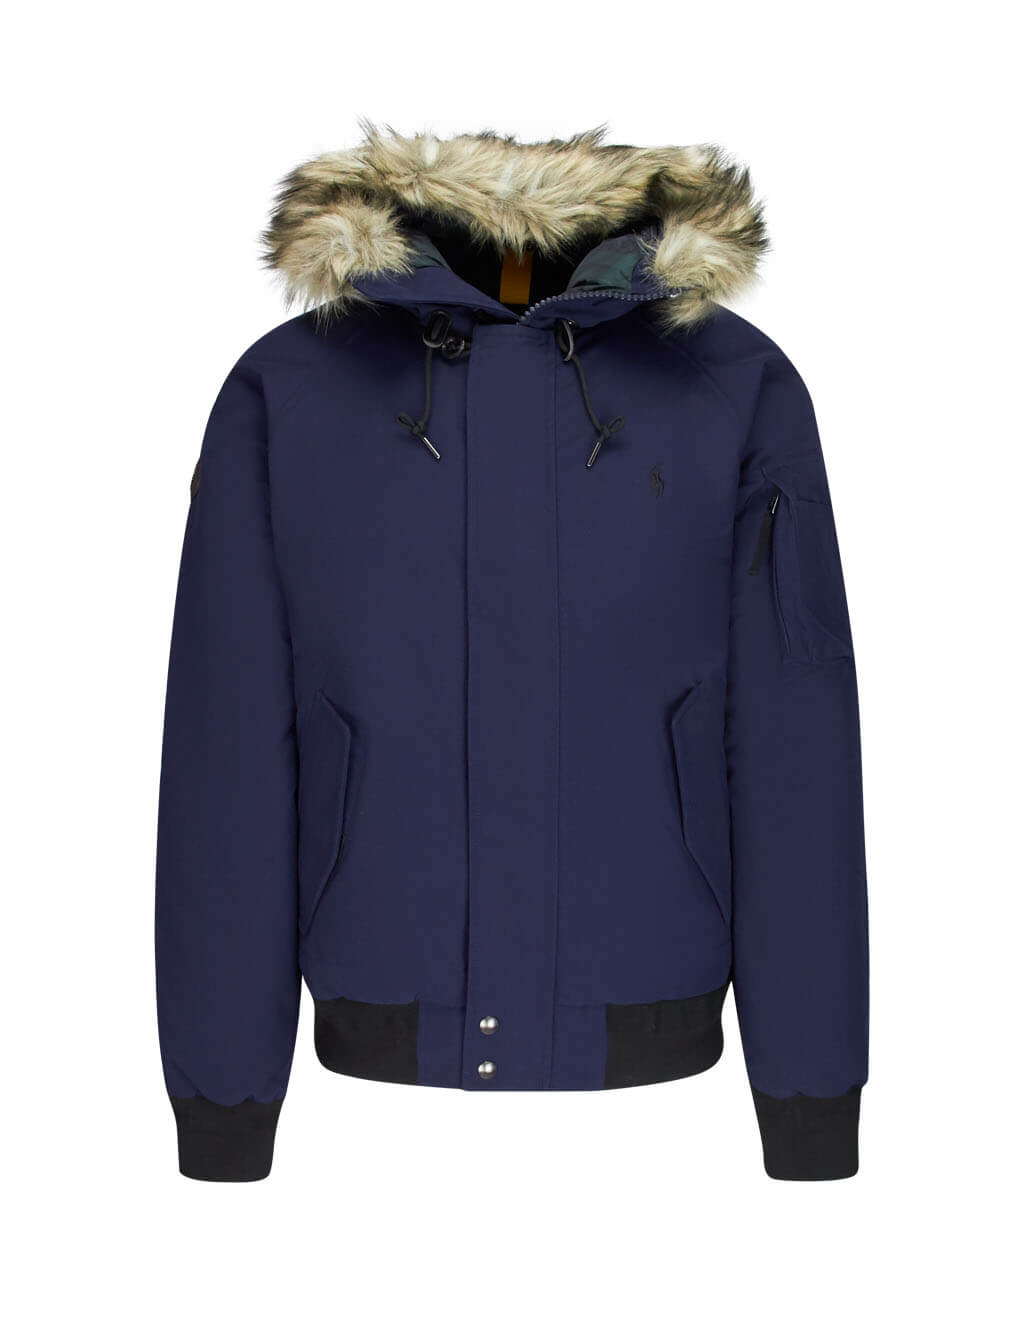 polo coat with fur